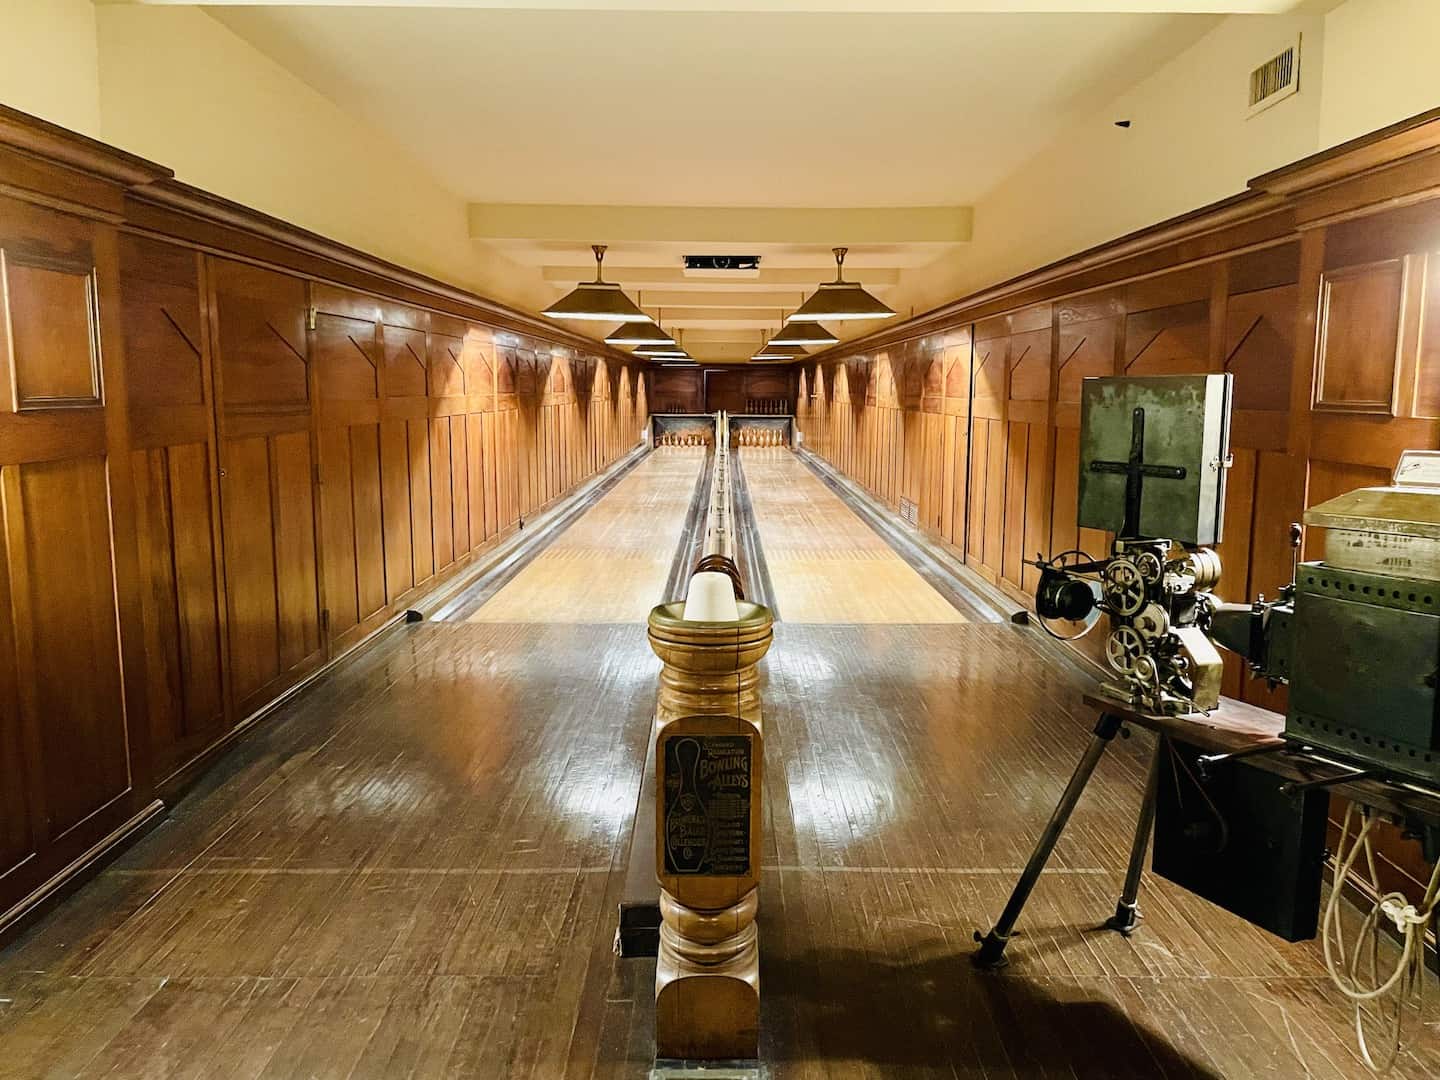 An antique movie came sits near a wooden bowling alley with two lanes at Nemours Estate.